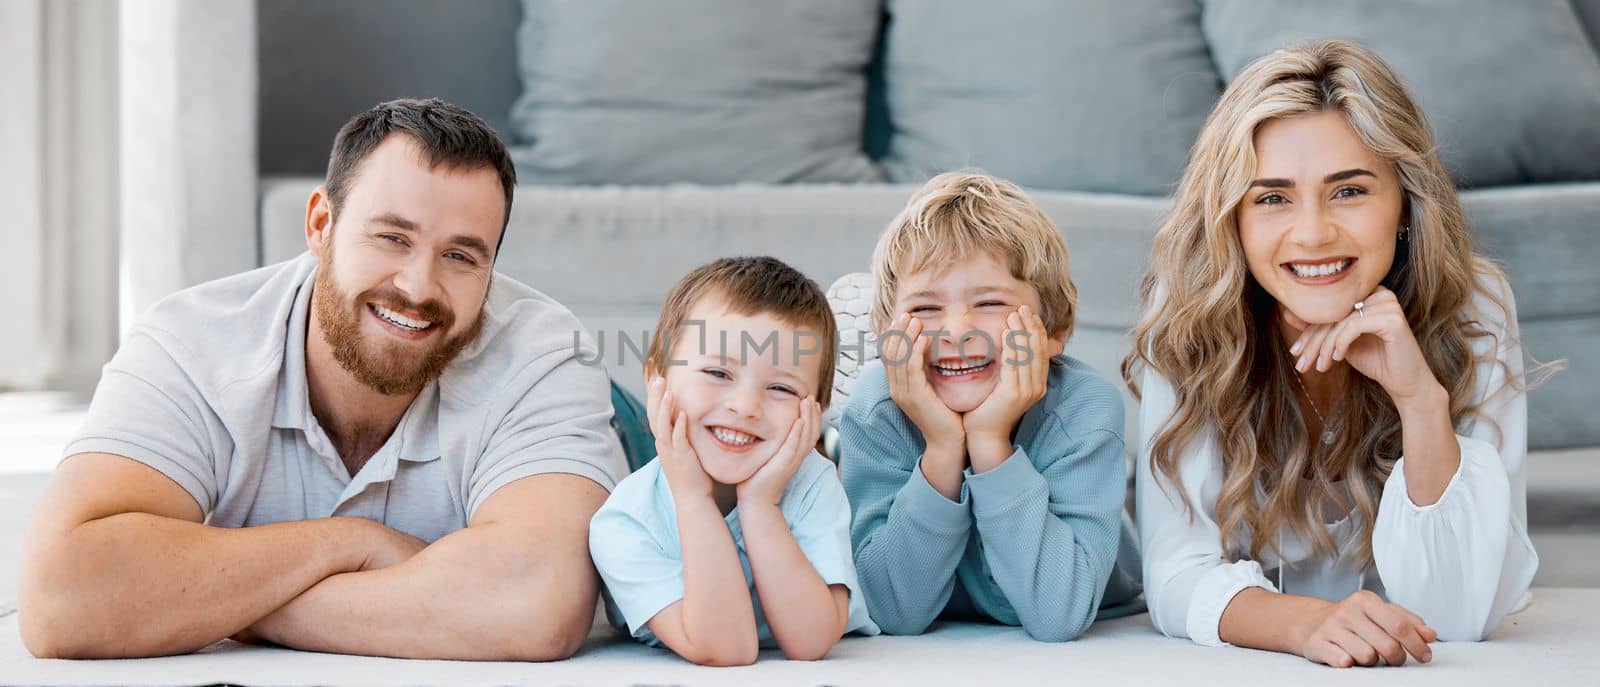 Portrait of smiling caucasian family of four lying and relaxing on the floor at home. Carefree loving parents bonding with cute little sons. Playful young boys spending quality time with mom and dad.